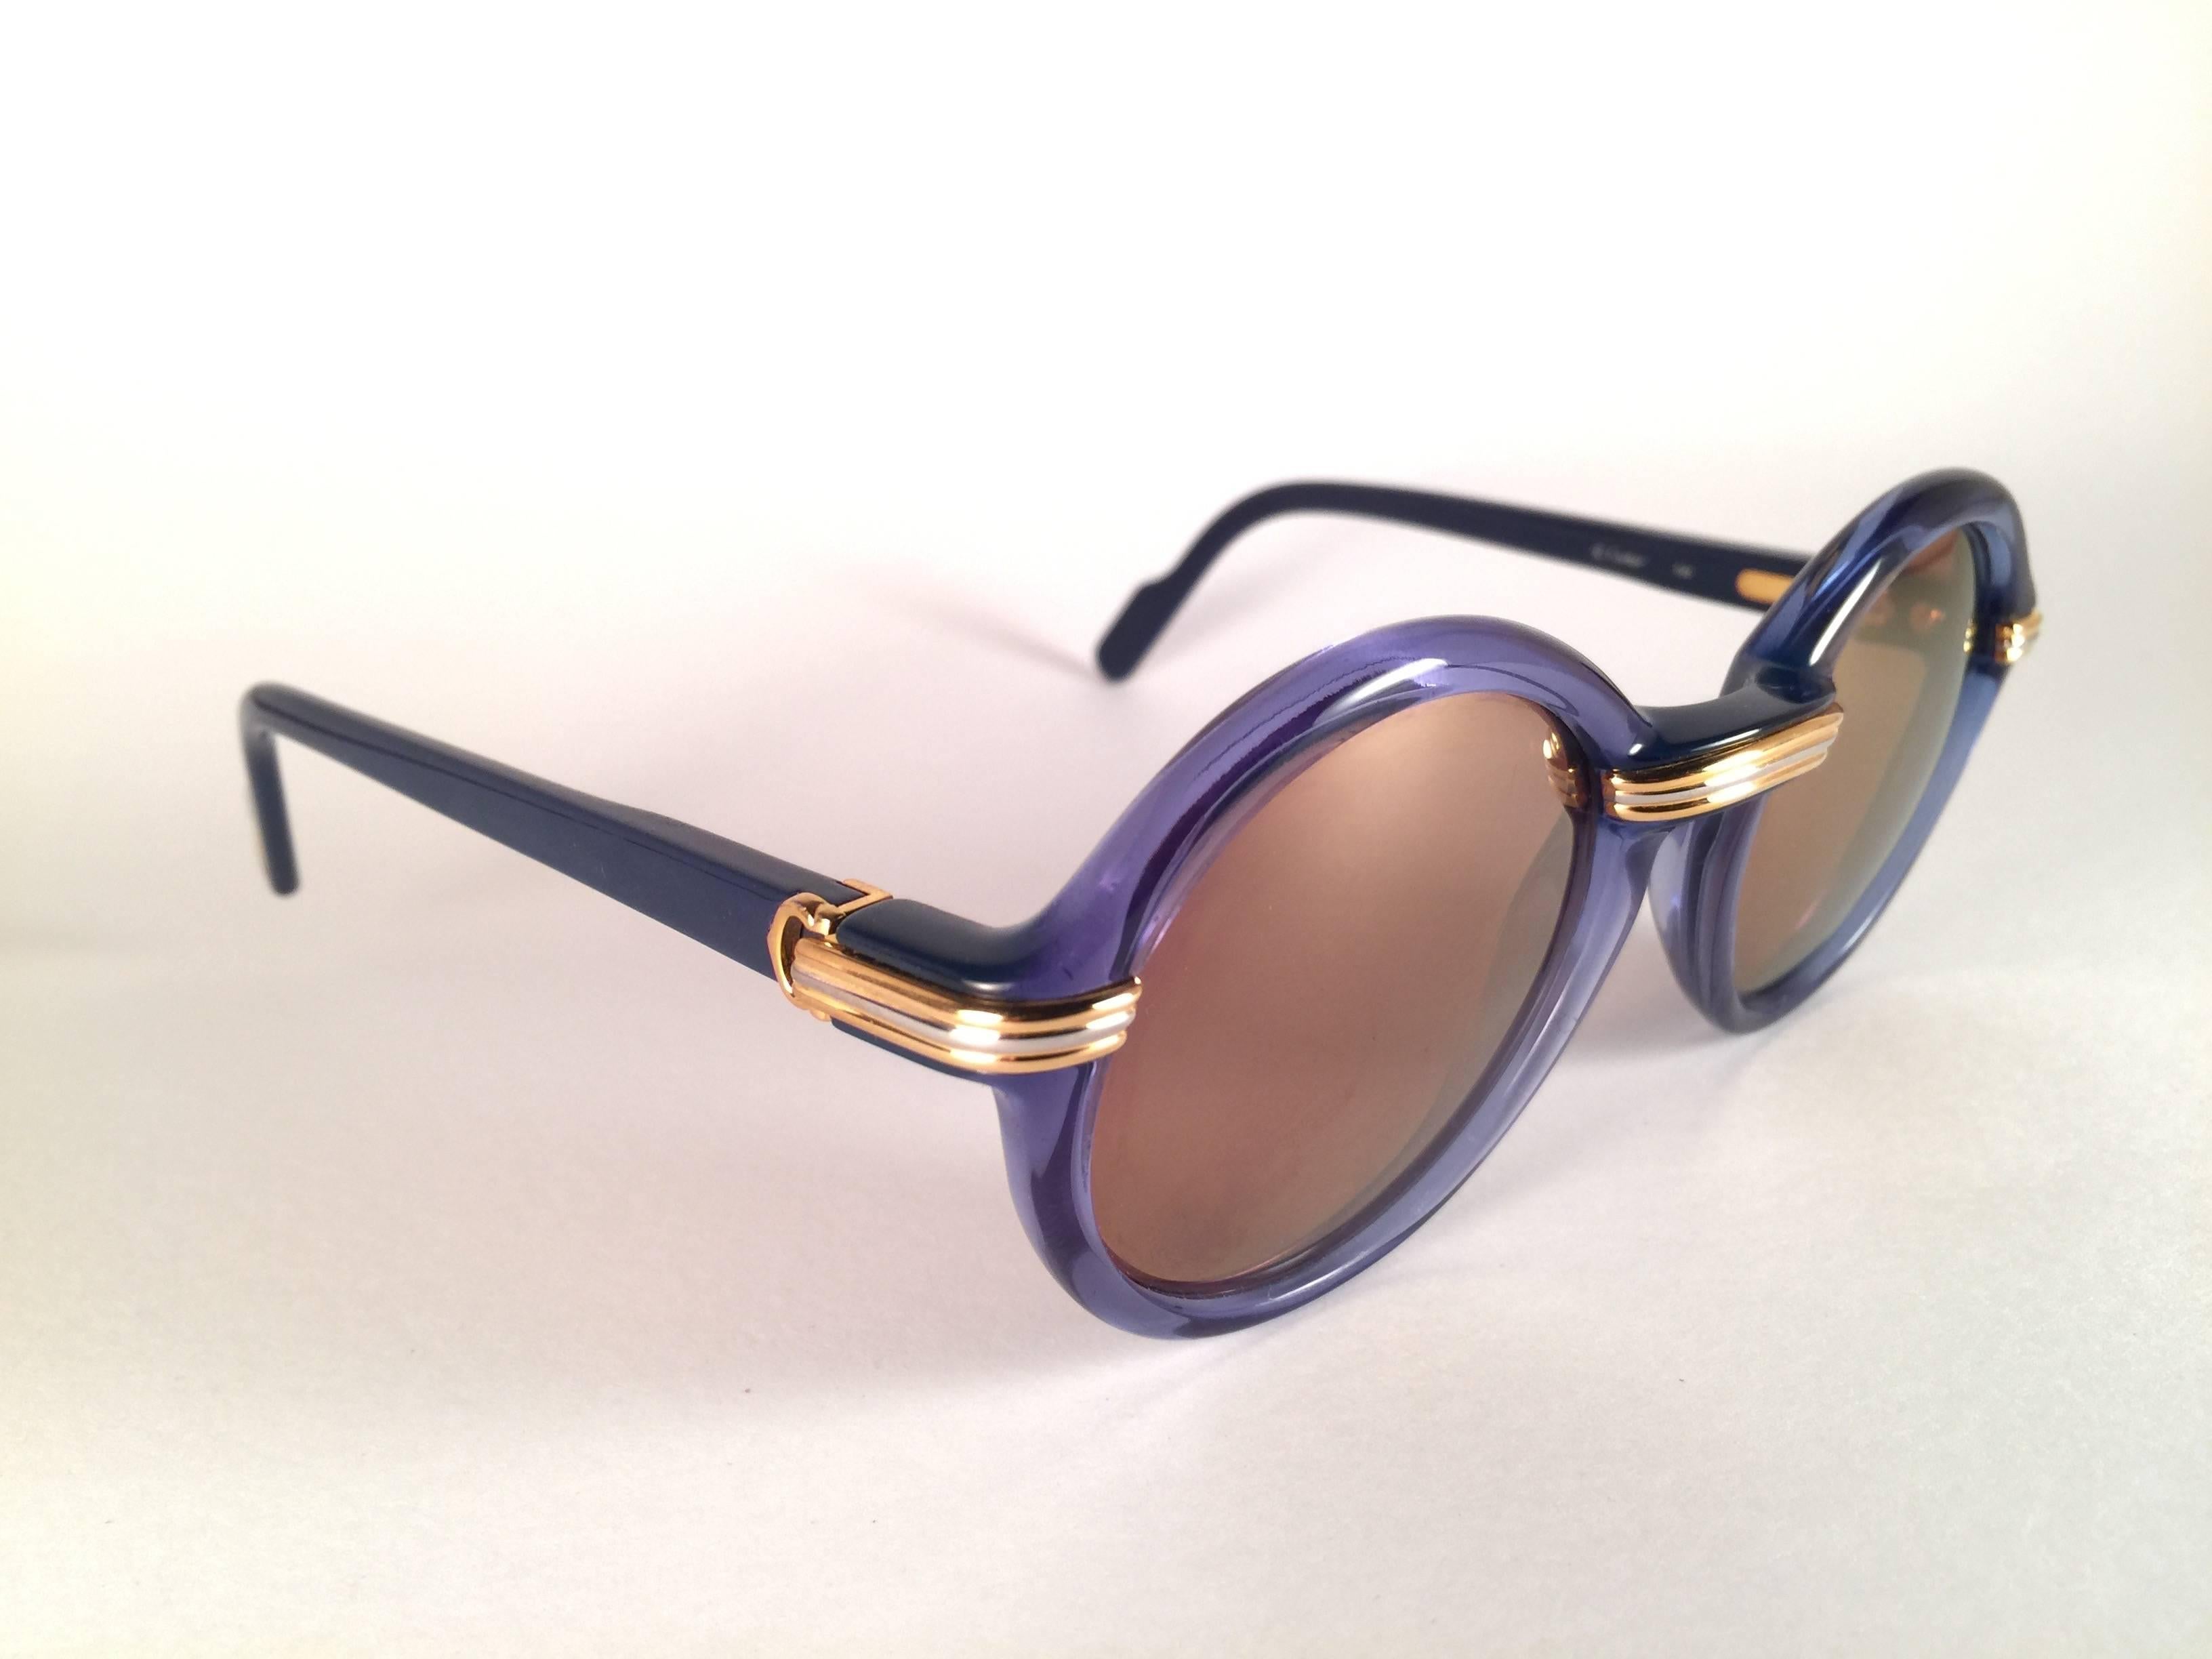 
New 1991 Original Cartier Cabriolet Art Deco Translucent Blue sunglasses with grey slight mirror ( uv protection ) lenses. Frame has the famous real gold and white gold accents in the middle and on the sides.  All hallmarks. Cartier gold signs on